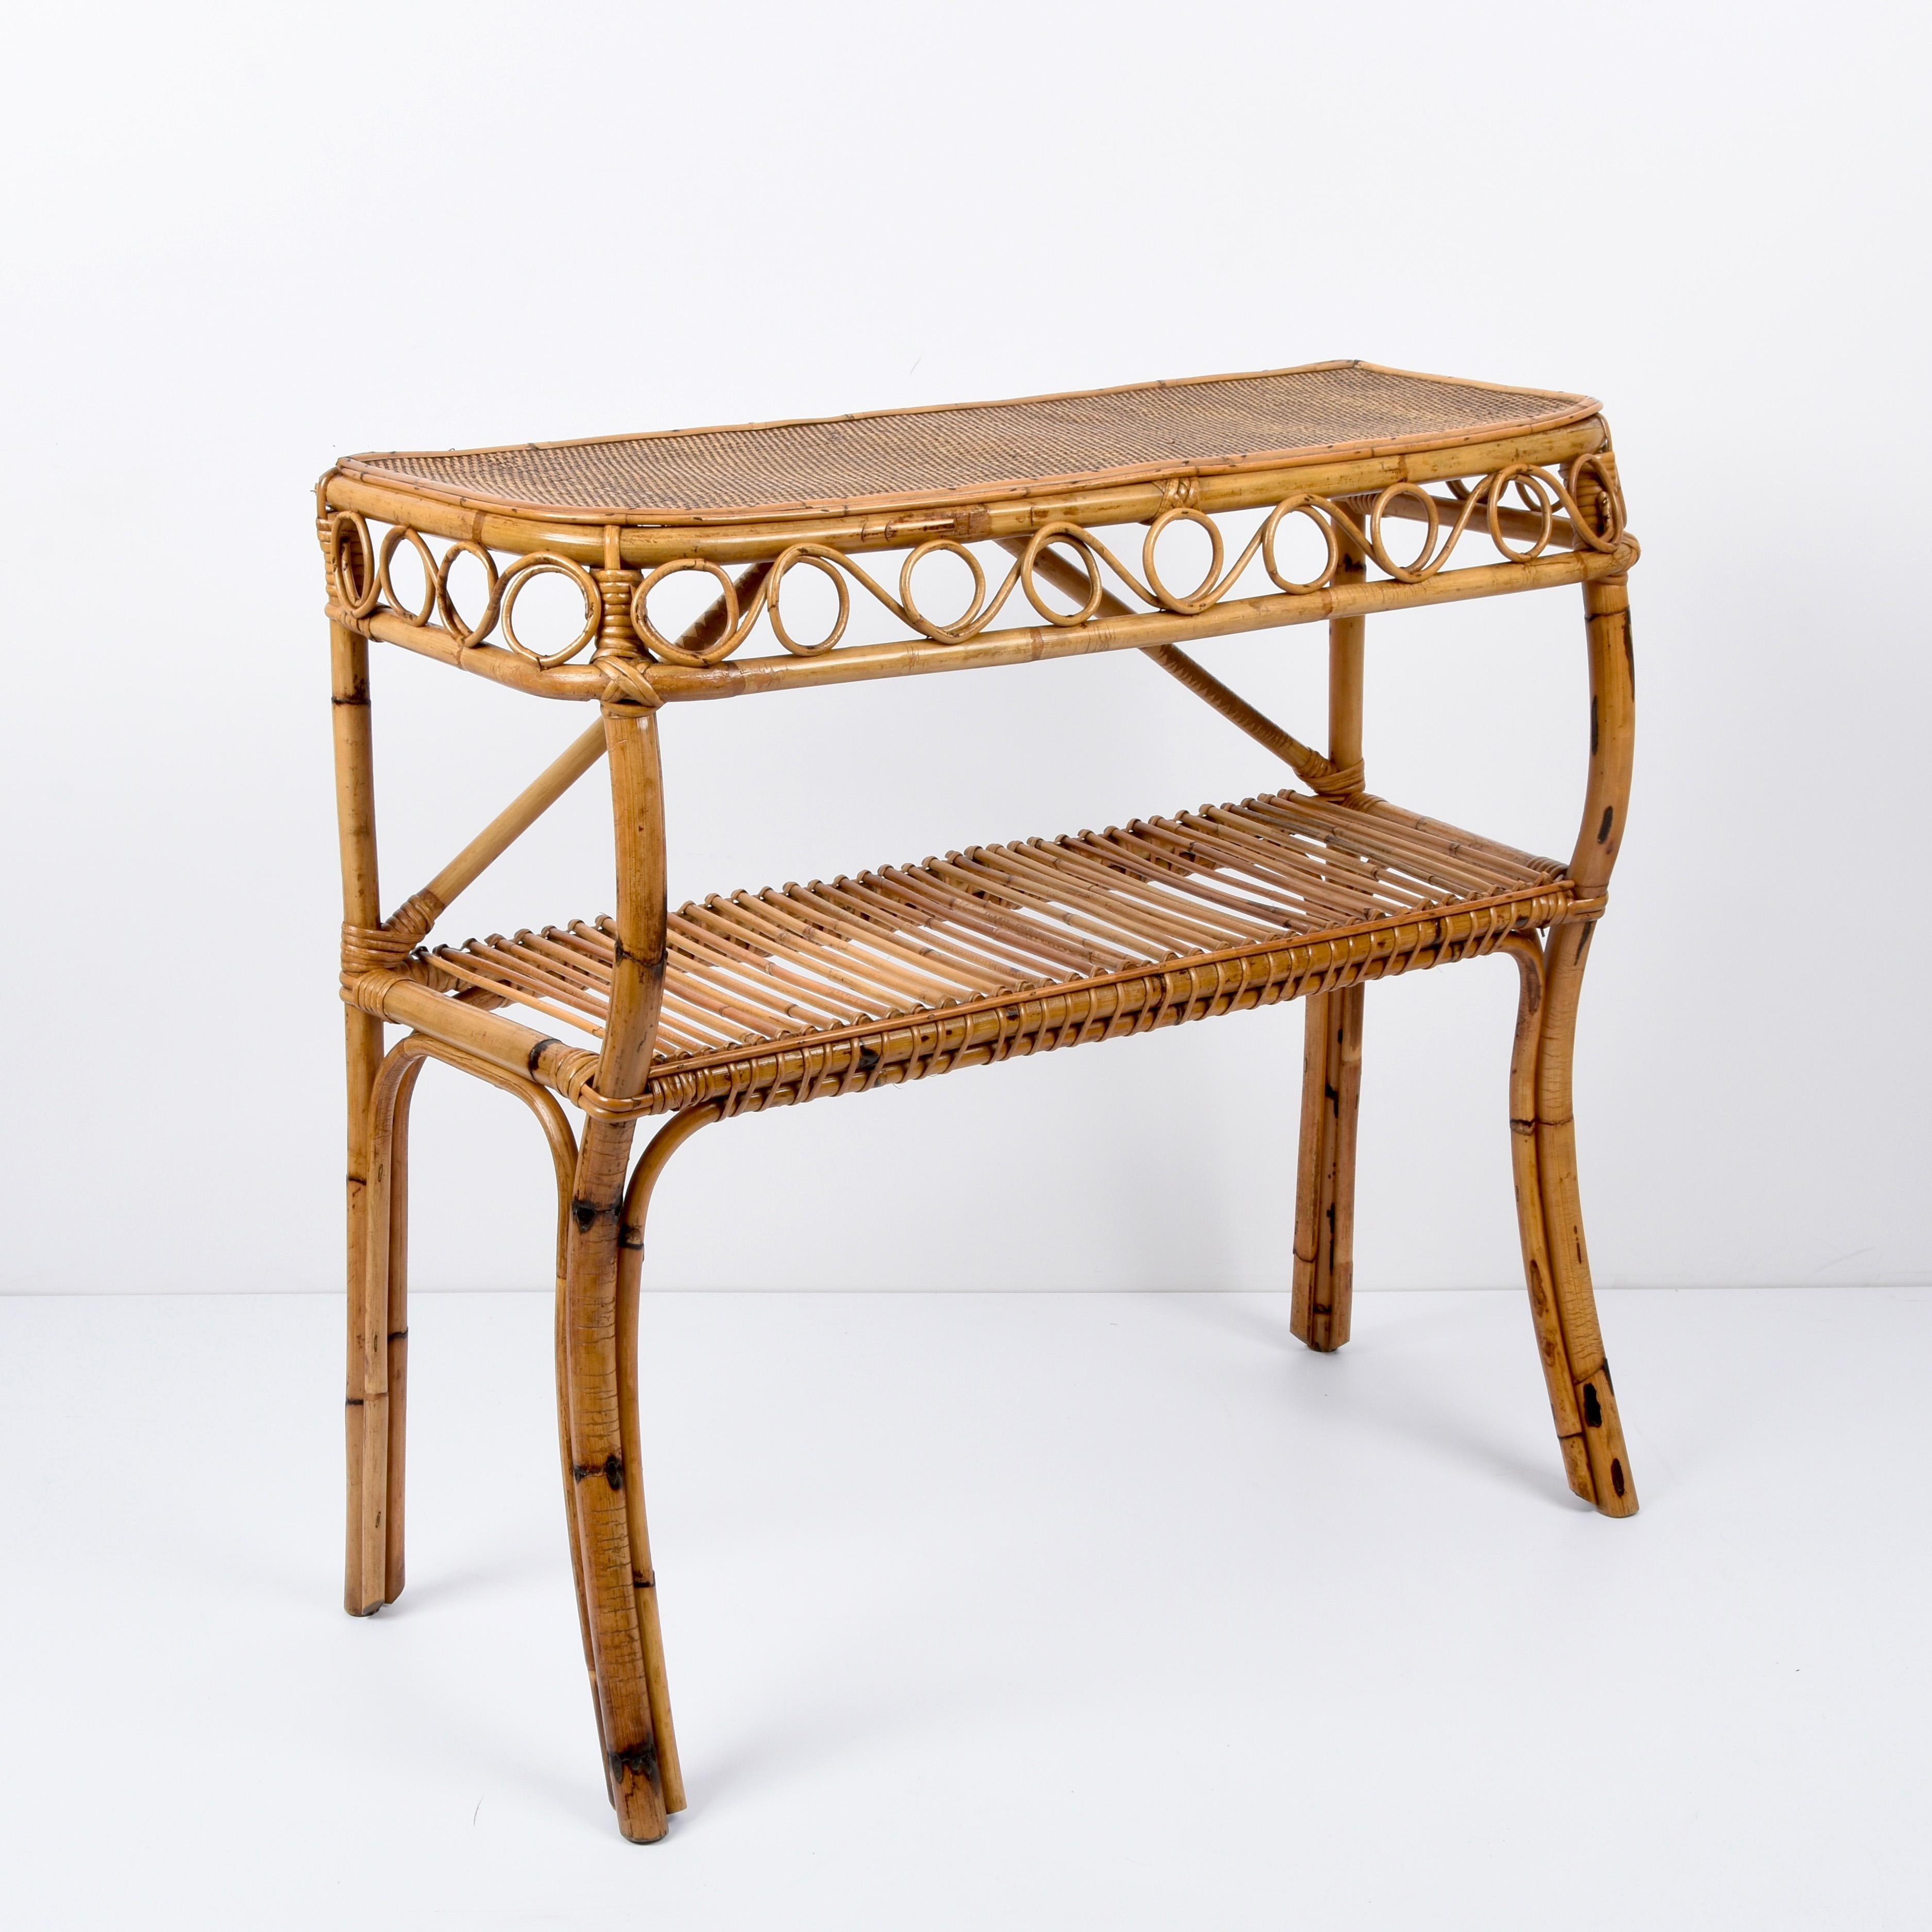 Wonderful console table in bamboo and rattan. This piece was produced in the style of Franco Albini in Italy during the 1970s.

This console has four bamboo legs, with a shelf in the middle of the structure featuring a rattan decoration.

A